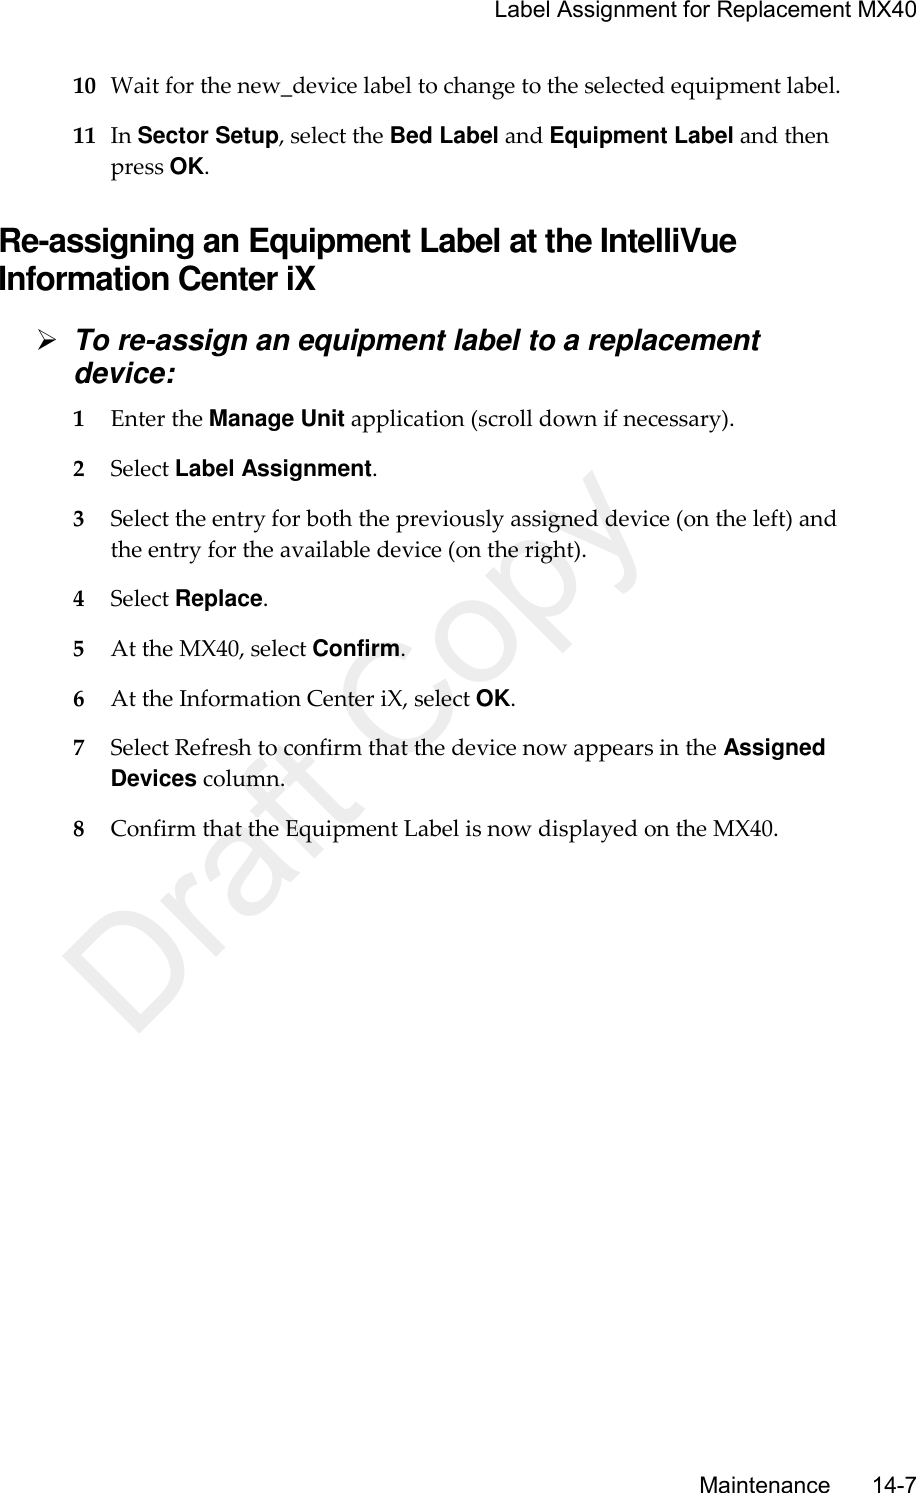     Label Assignment for Replacement MX40       Maintenance       14-7 10 Wait for the new_device label to change to the selected equipment label. 11 In Sector Setup, select the Bed Label and Equipment Label and then press OK.  Re-assigning an Equipment Label at the IntelliVue Information Center iX  To re-assign an equipment label to a replacement device: 1 Enter the Manage Unit application (scroll down if necessary). 2 Select Label Assignment. 3 Select the entry for both the previously assigned device (on the left) and the entry for the available device (on the right). 4 Select Replace. 5 At the MX40, select Confirm. 6 At the Information Center iX, select OK. 7 Select Refresh to confirm that the device now appears in the Assigned Devices column. 8 Confirm that the Equipment Label is now displayed on the MX40.  Draft Copy